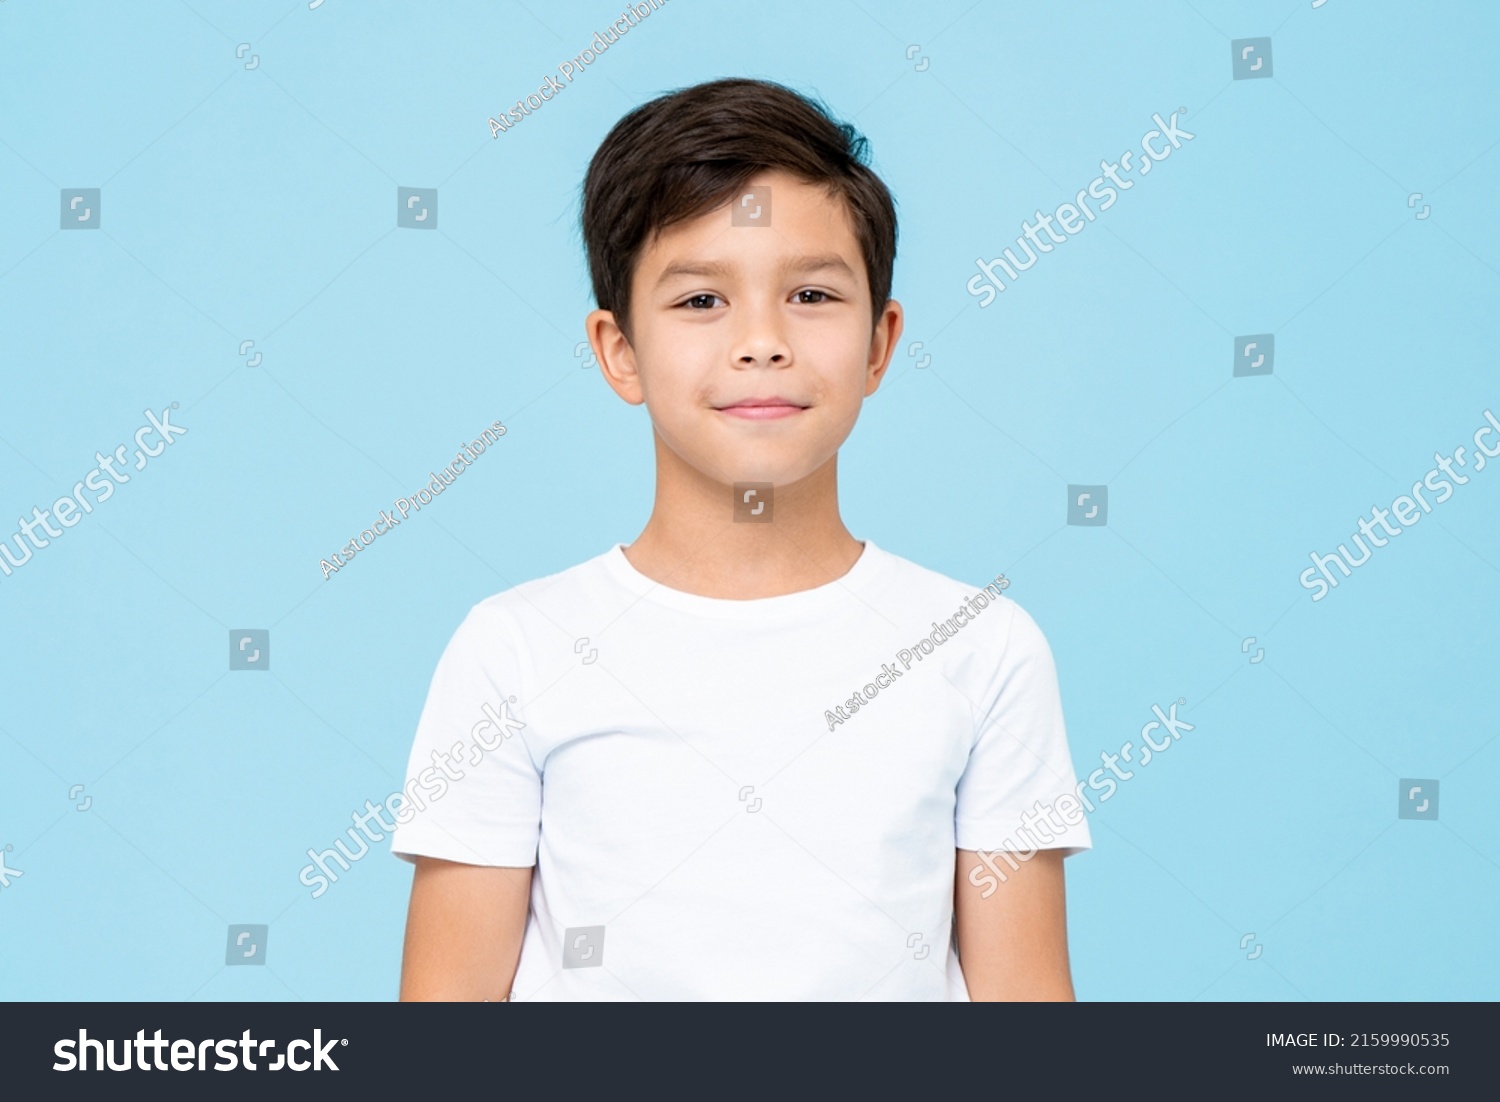 Cute smiling boy in plain white t shirt looking at camera in isolated studio light blue color background #2159990535